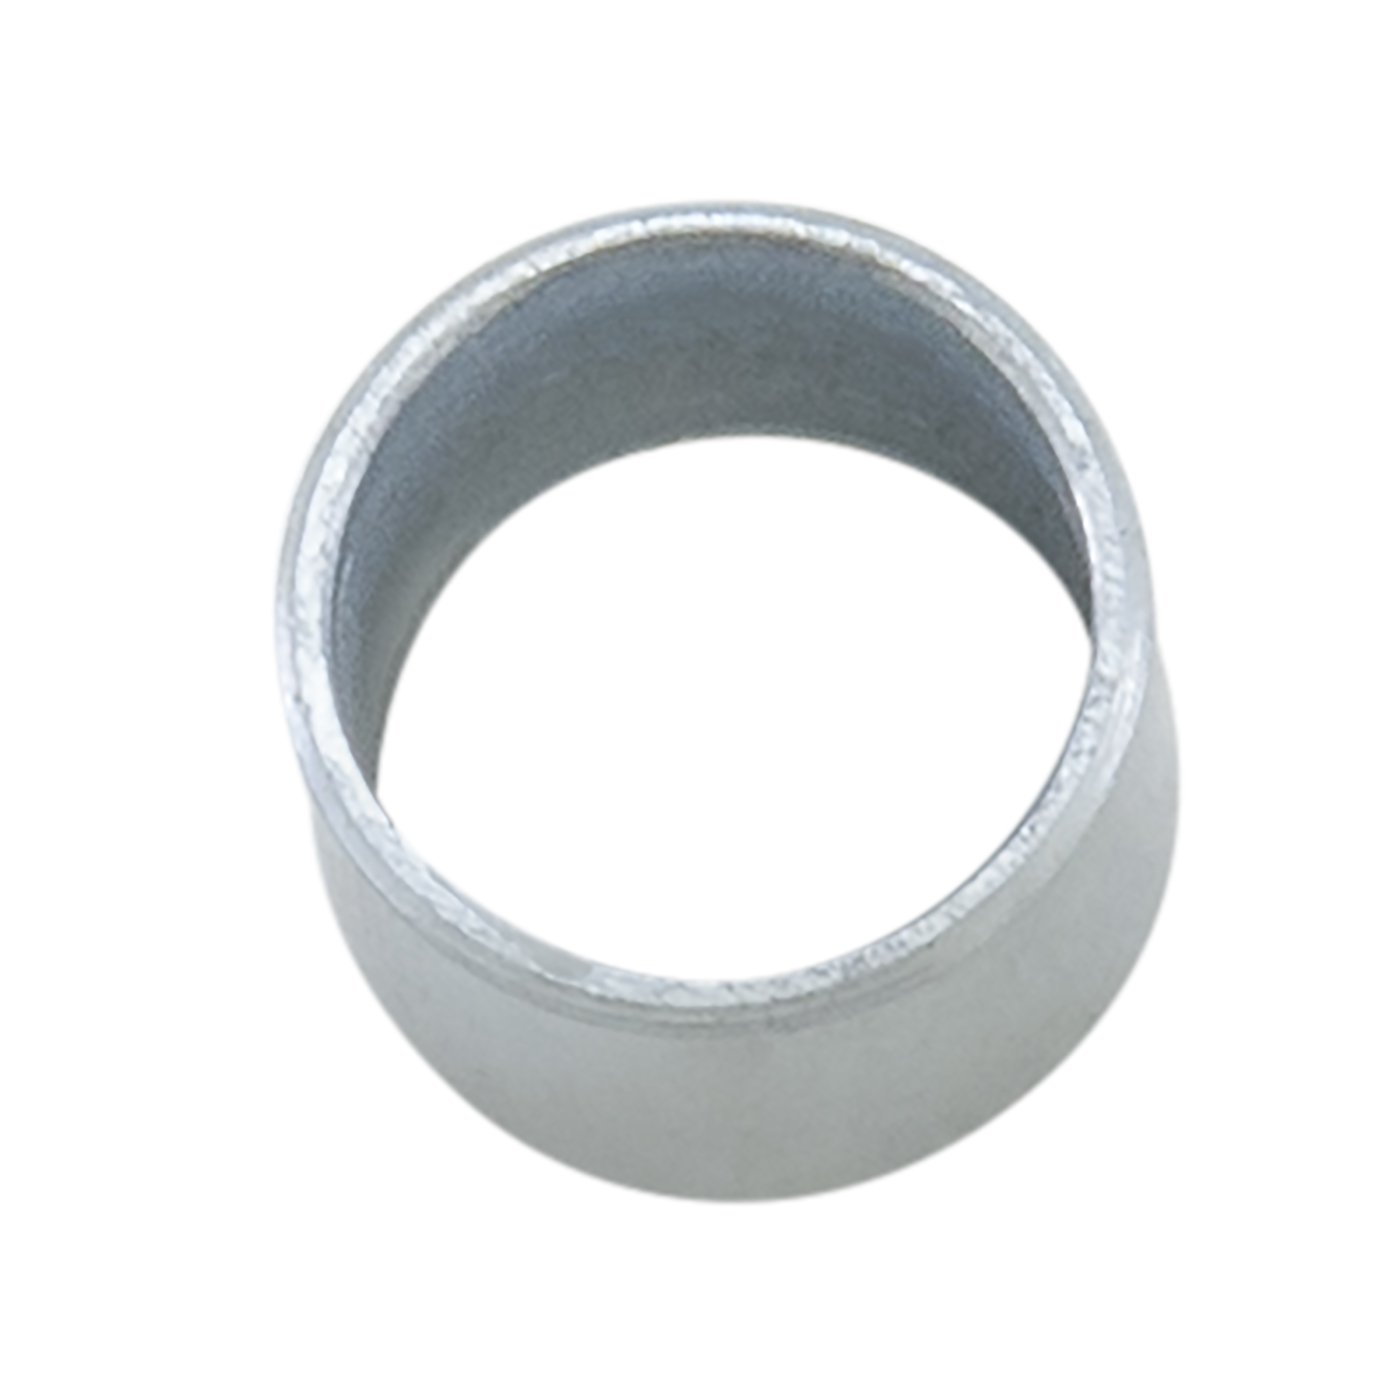 1/2" to 7/16" Ring Gear bolt Sleeve. 